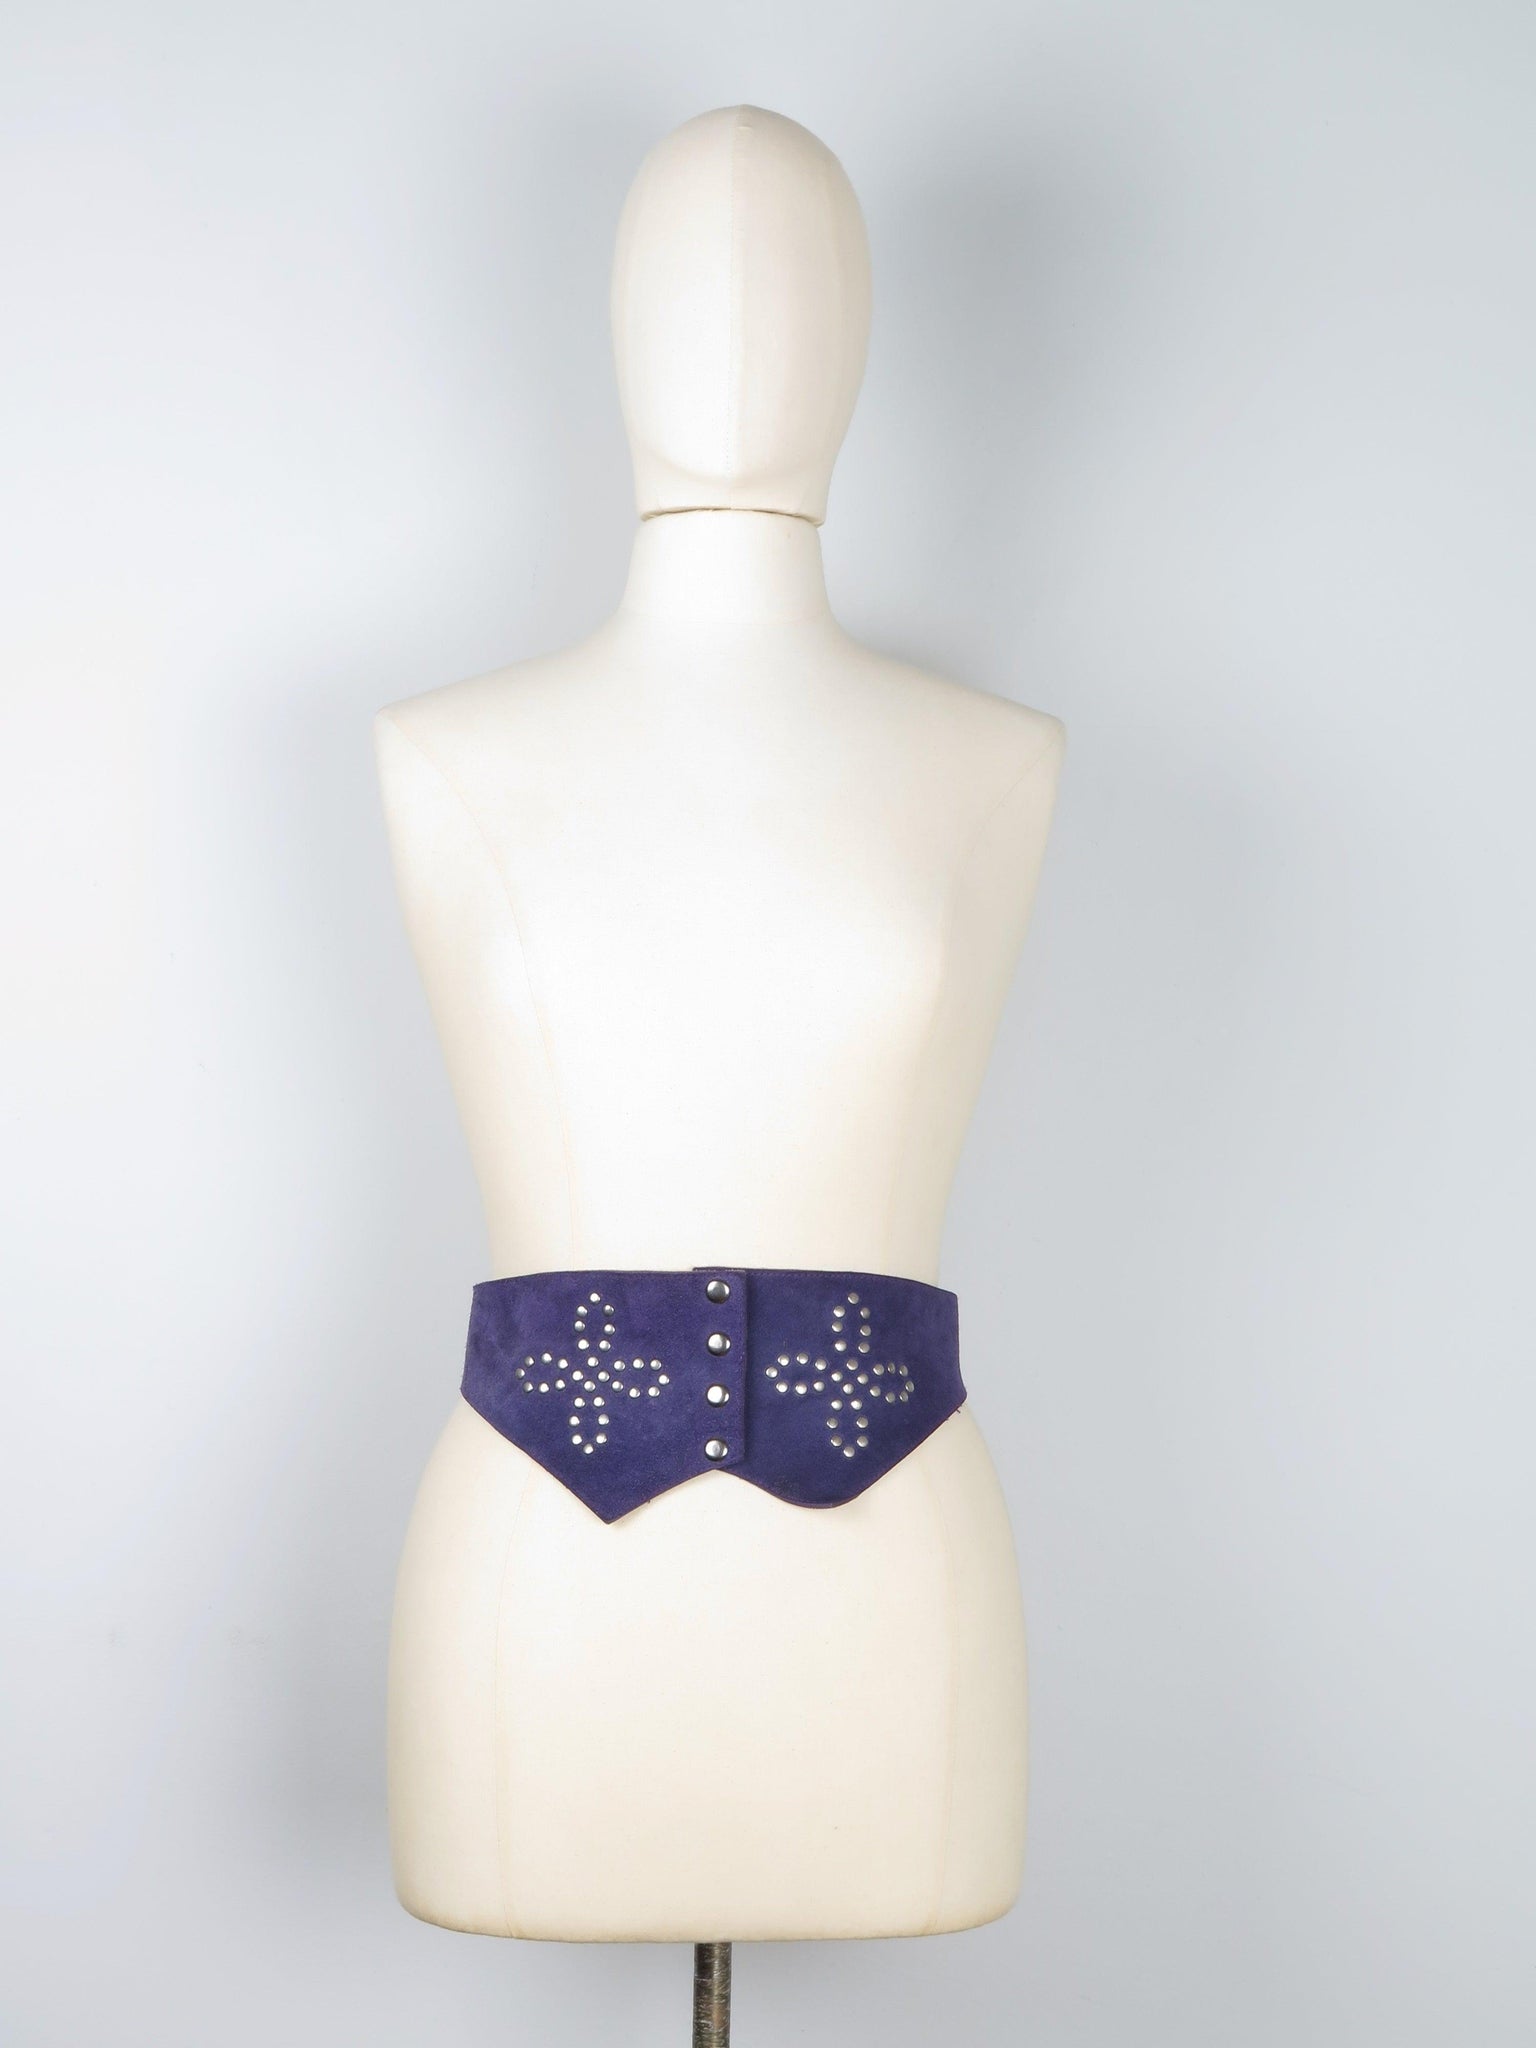 Women's Vintage Purple Suede 1970s/80s Waisted Belt S/M - The Harlequin